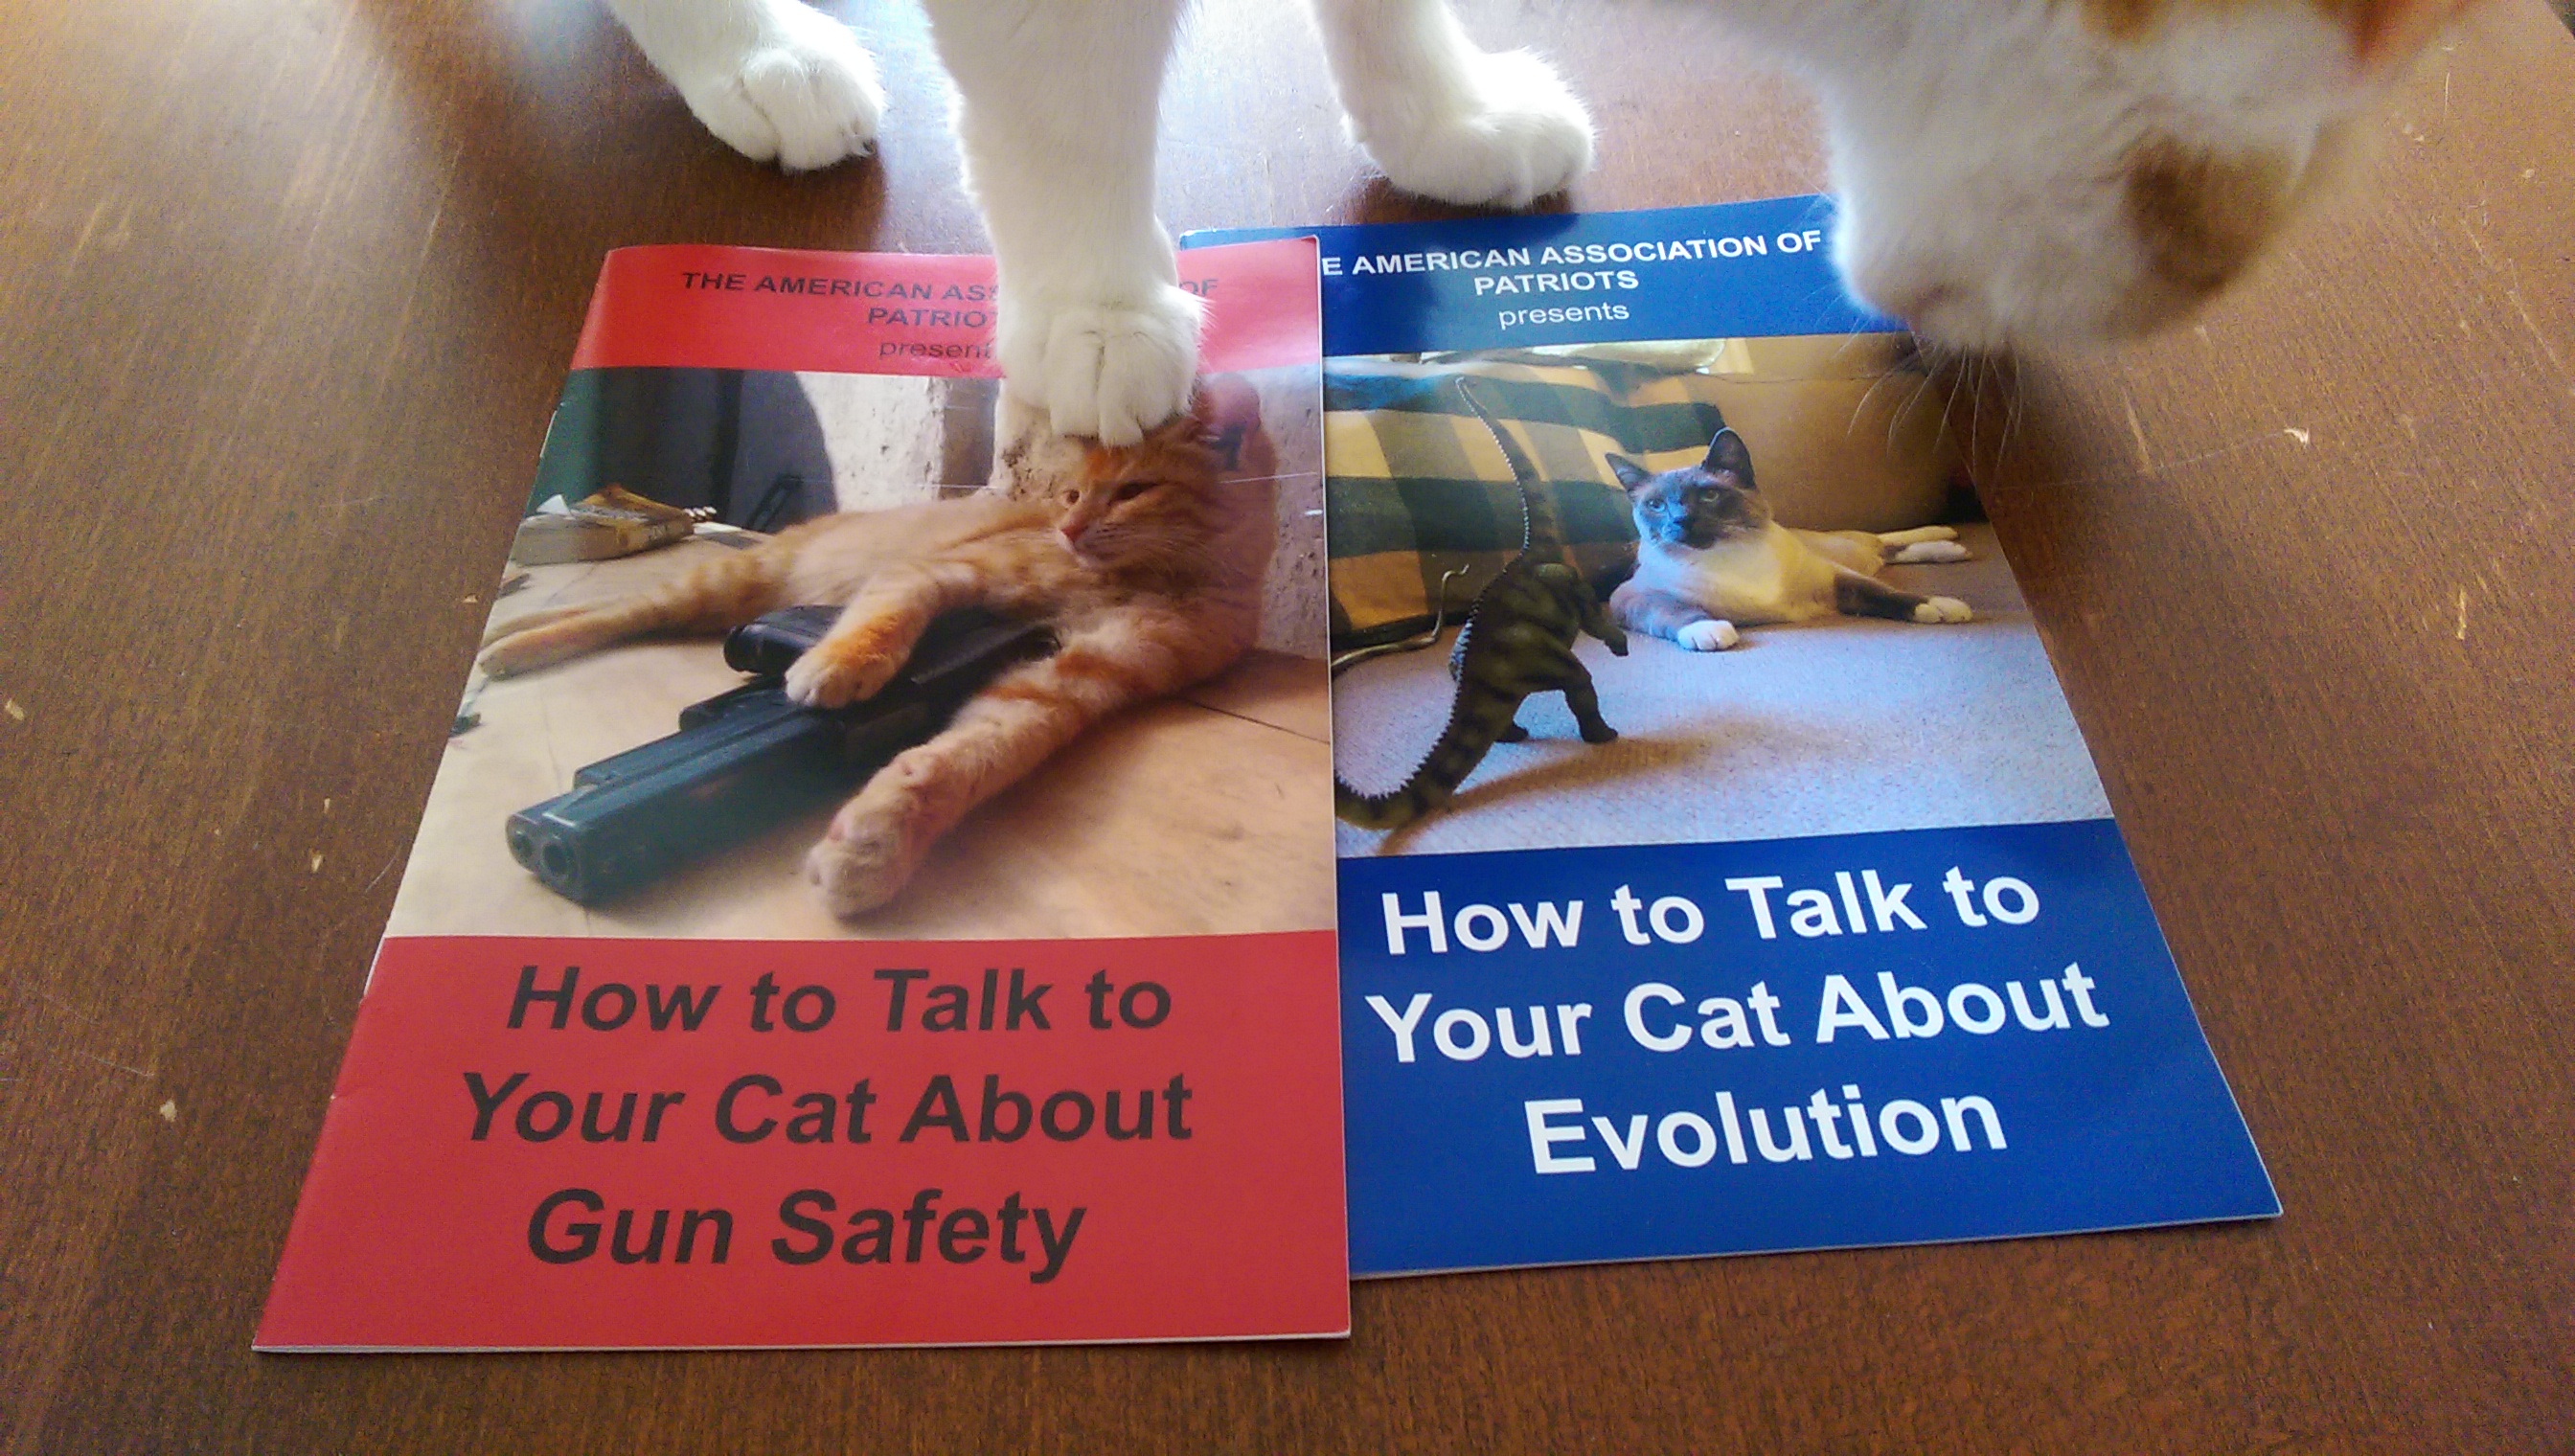 TALKING TO YOUR CAT ABOUT GUN SAFETY?? 